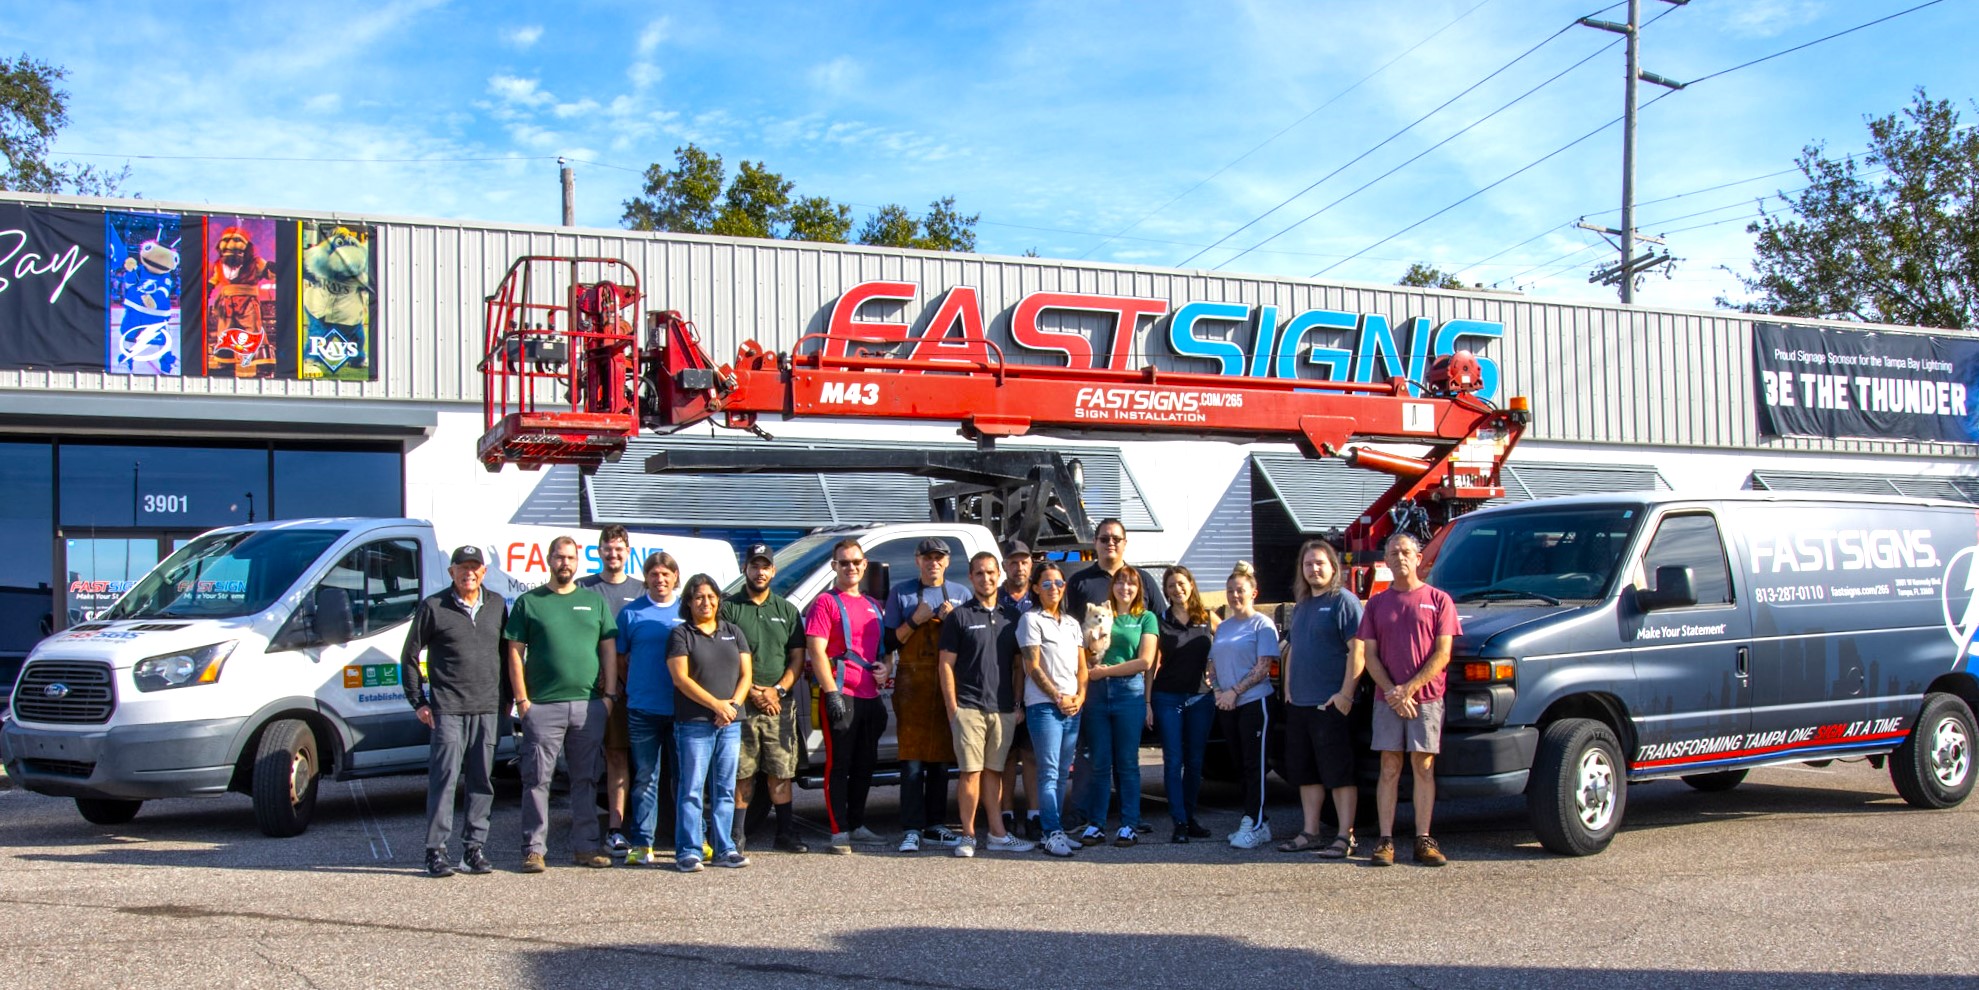 The team at FASTSIGNS South Tampa poses outside their storefront